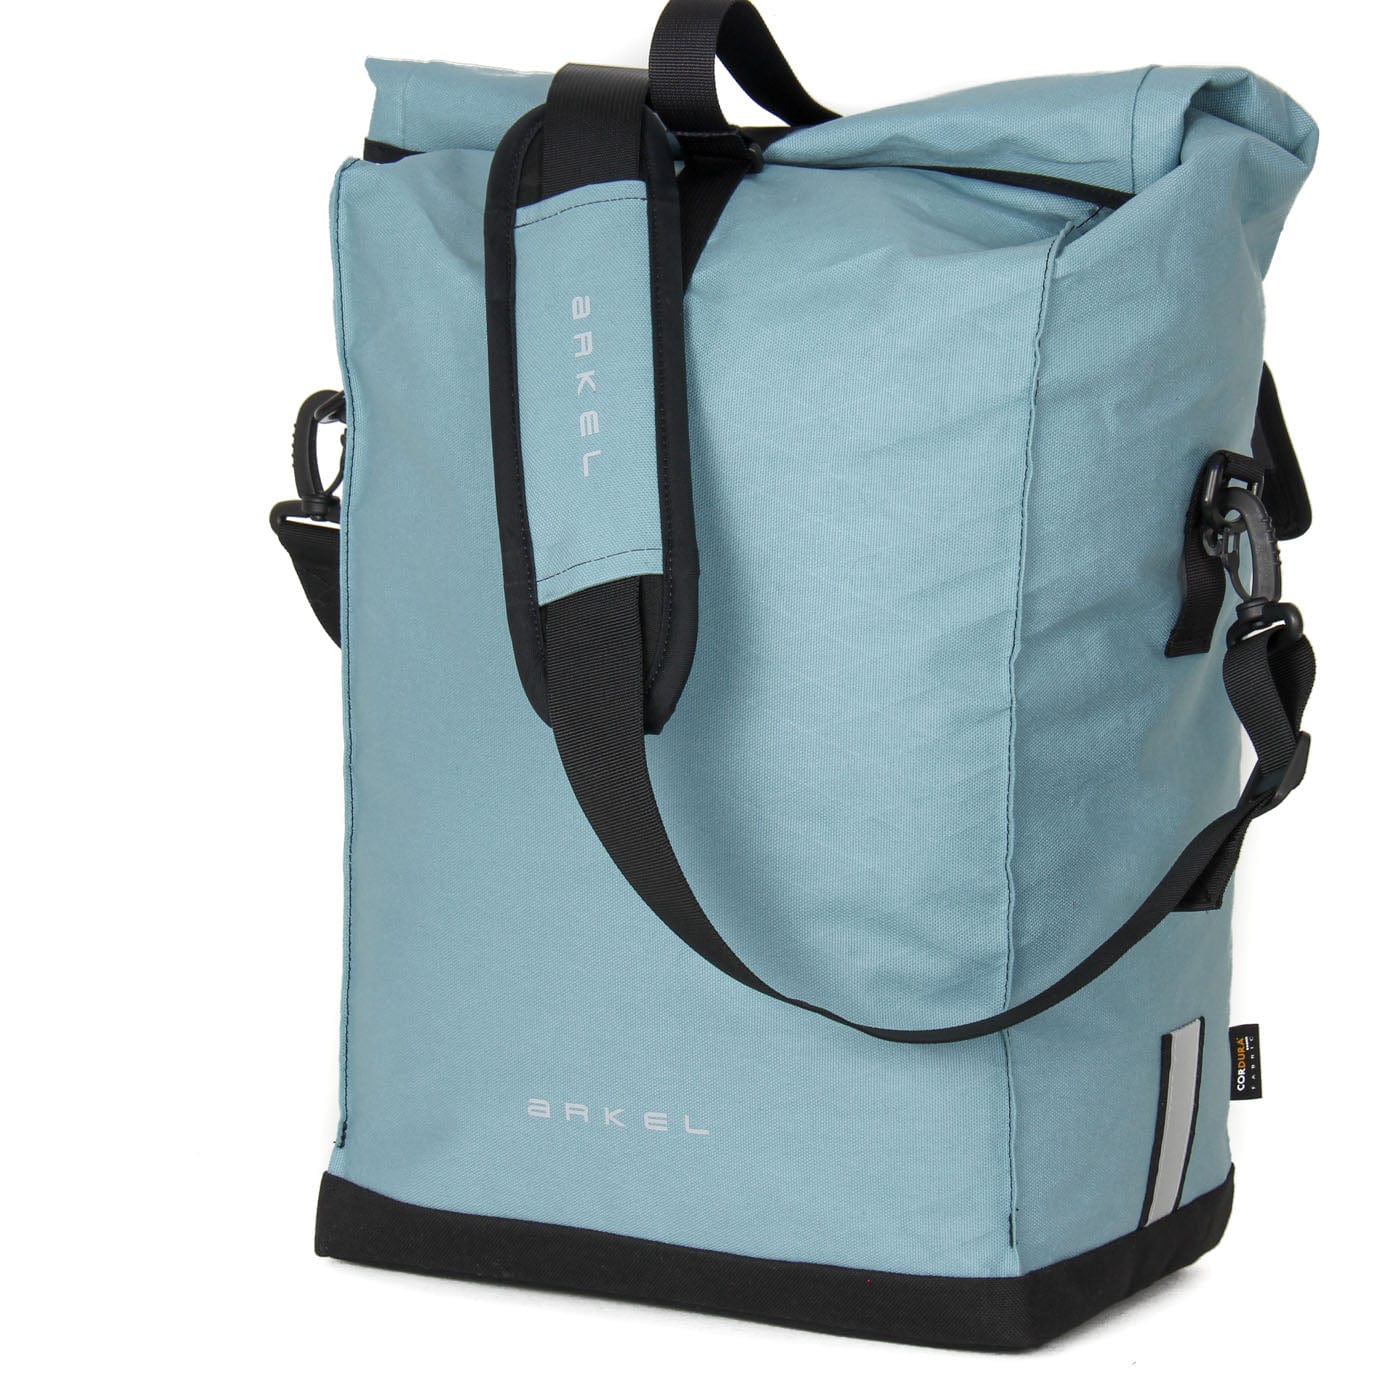 Signature V waterproof urban laptop pannier in Xpac X11 glacier blue color with shoulder strap for off the bike transport